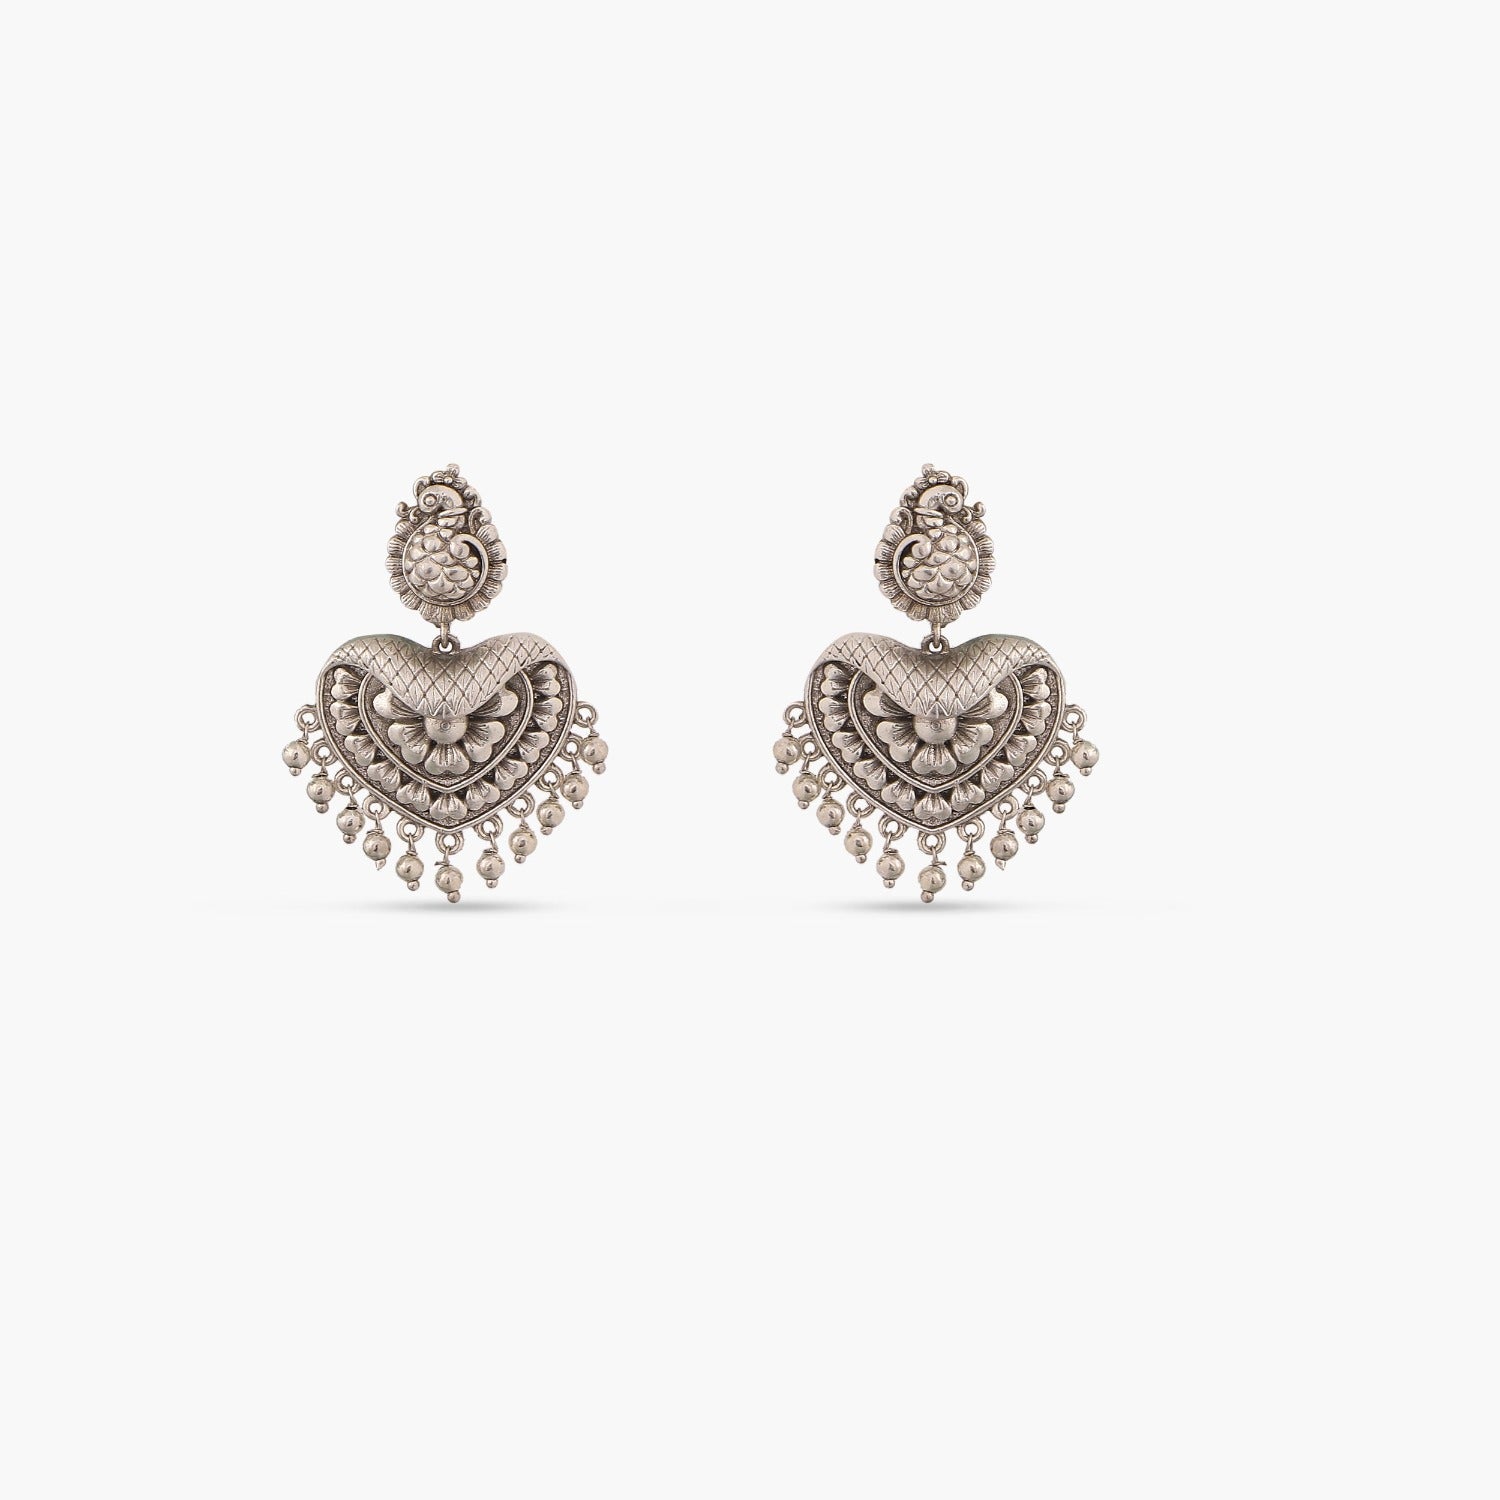 Buy Jewelopia Oxidised Silver Jhumki Earrings German Silver Oxidized Floral  Design Pearl Drop Traditional Earrings For Women and Girls (Black Pearl) at  Amazon.in